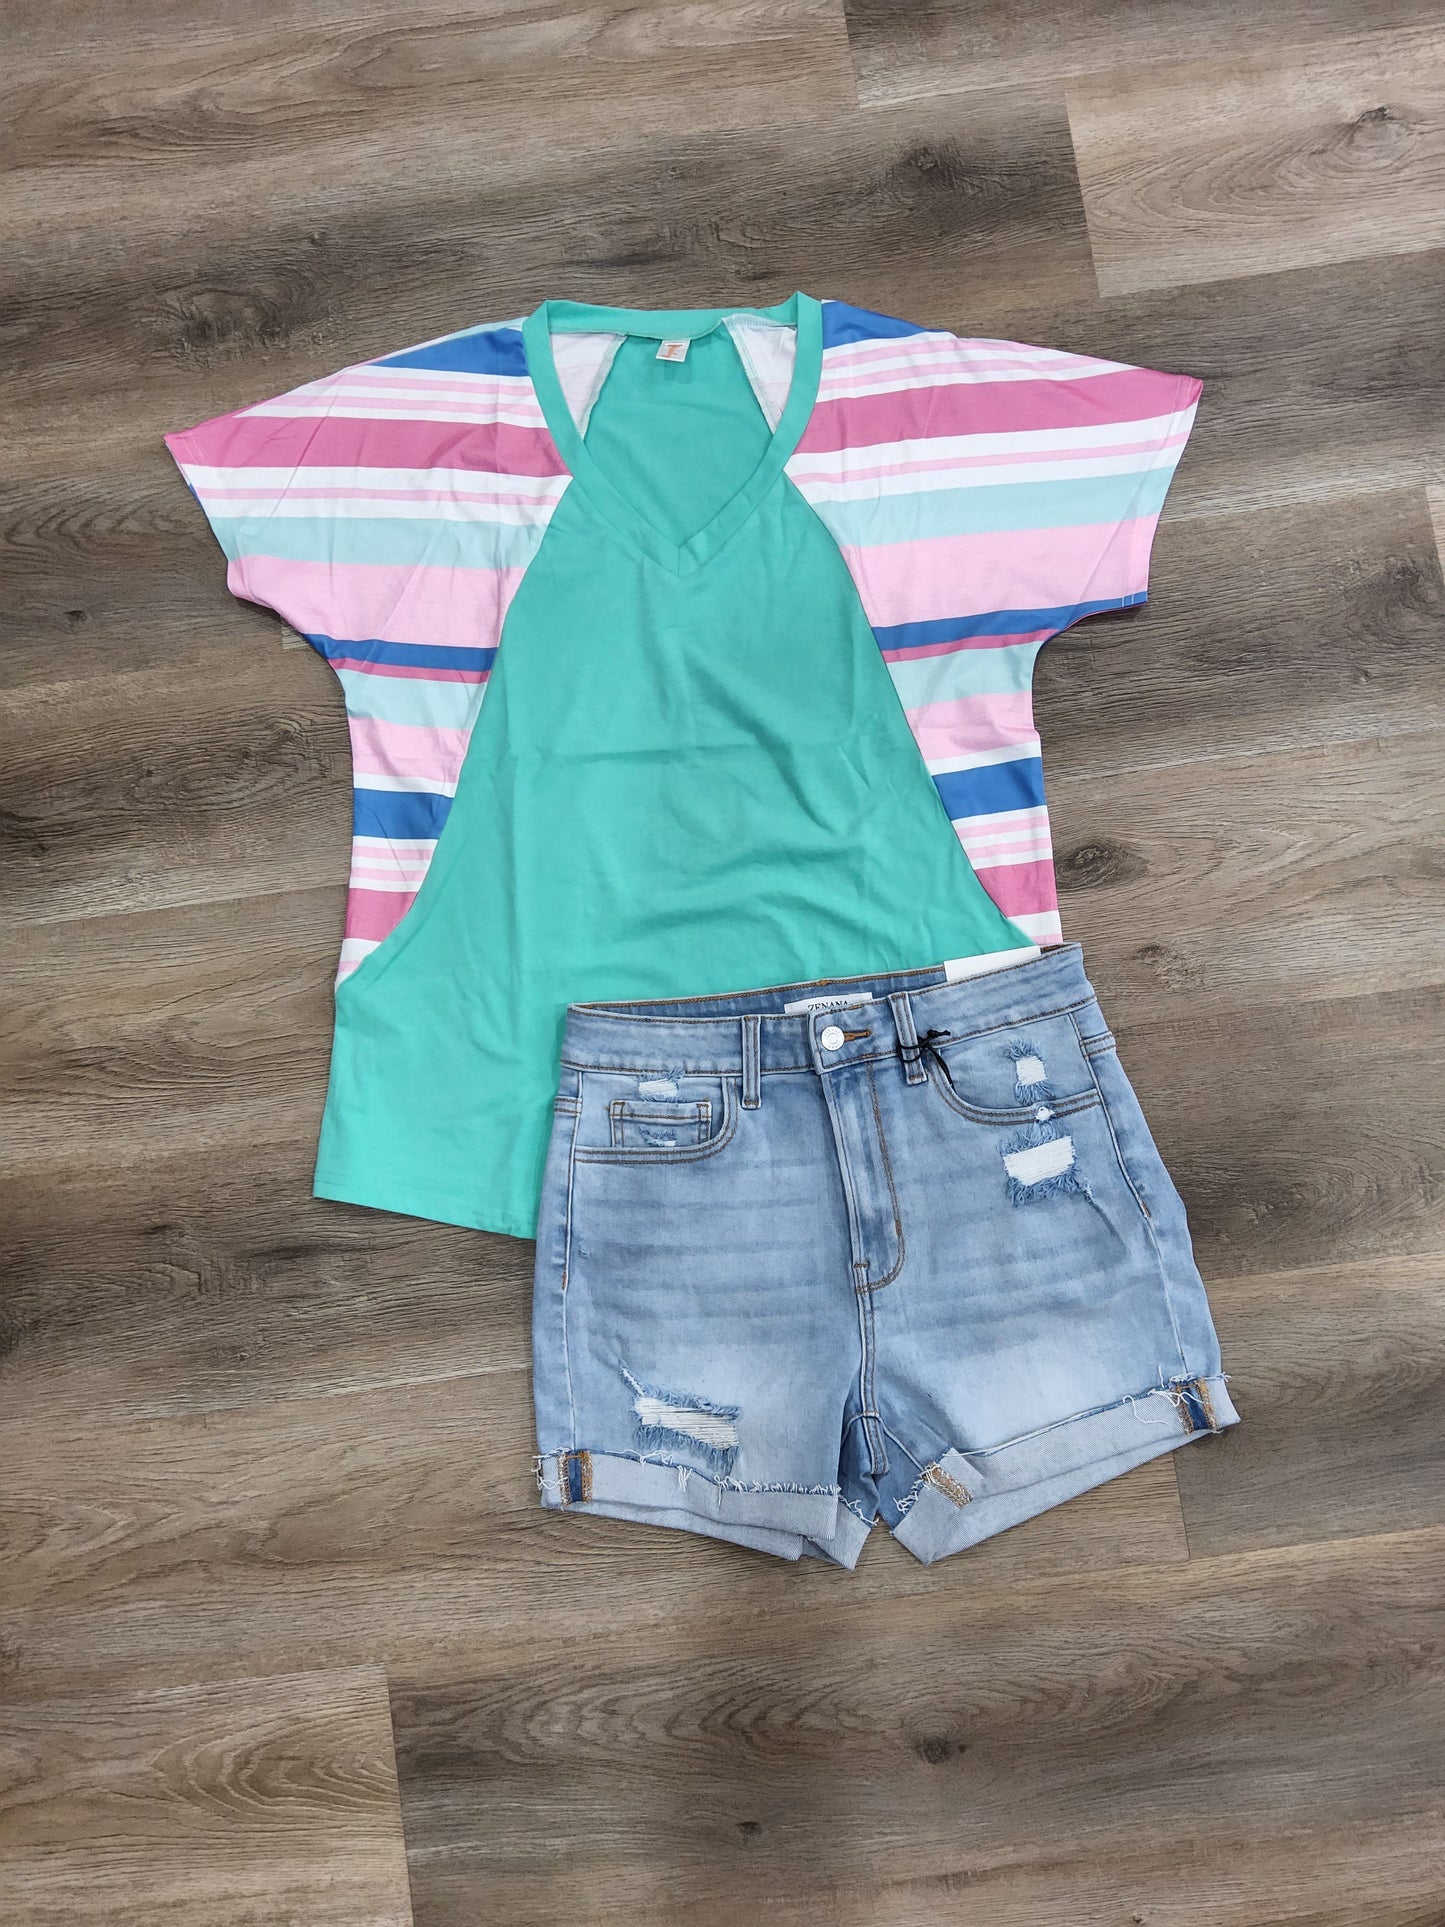 STRIPED SLEEVE TEAL TOP